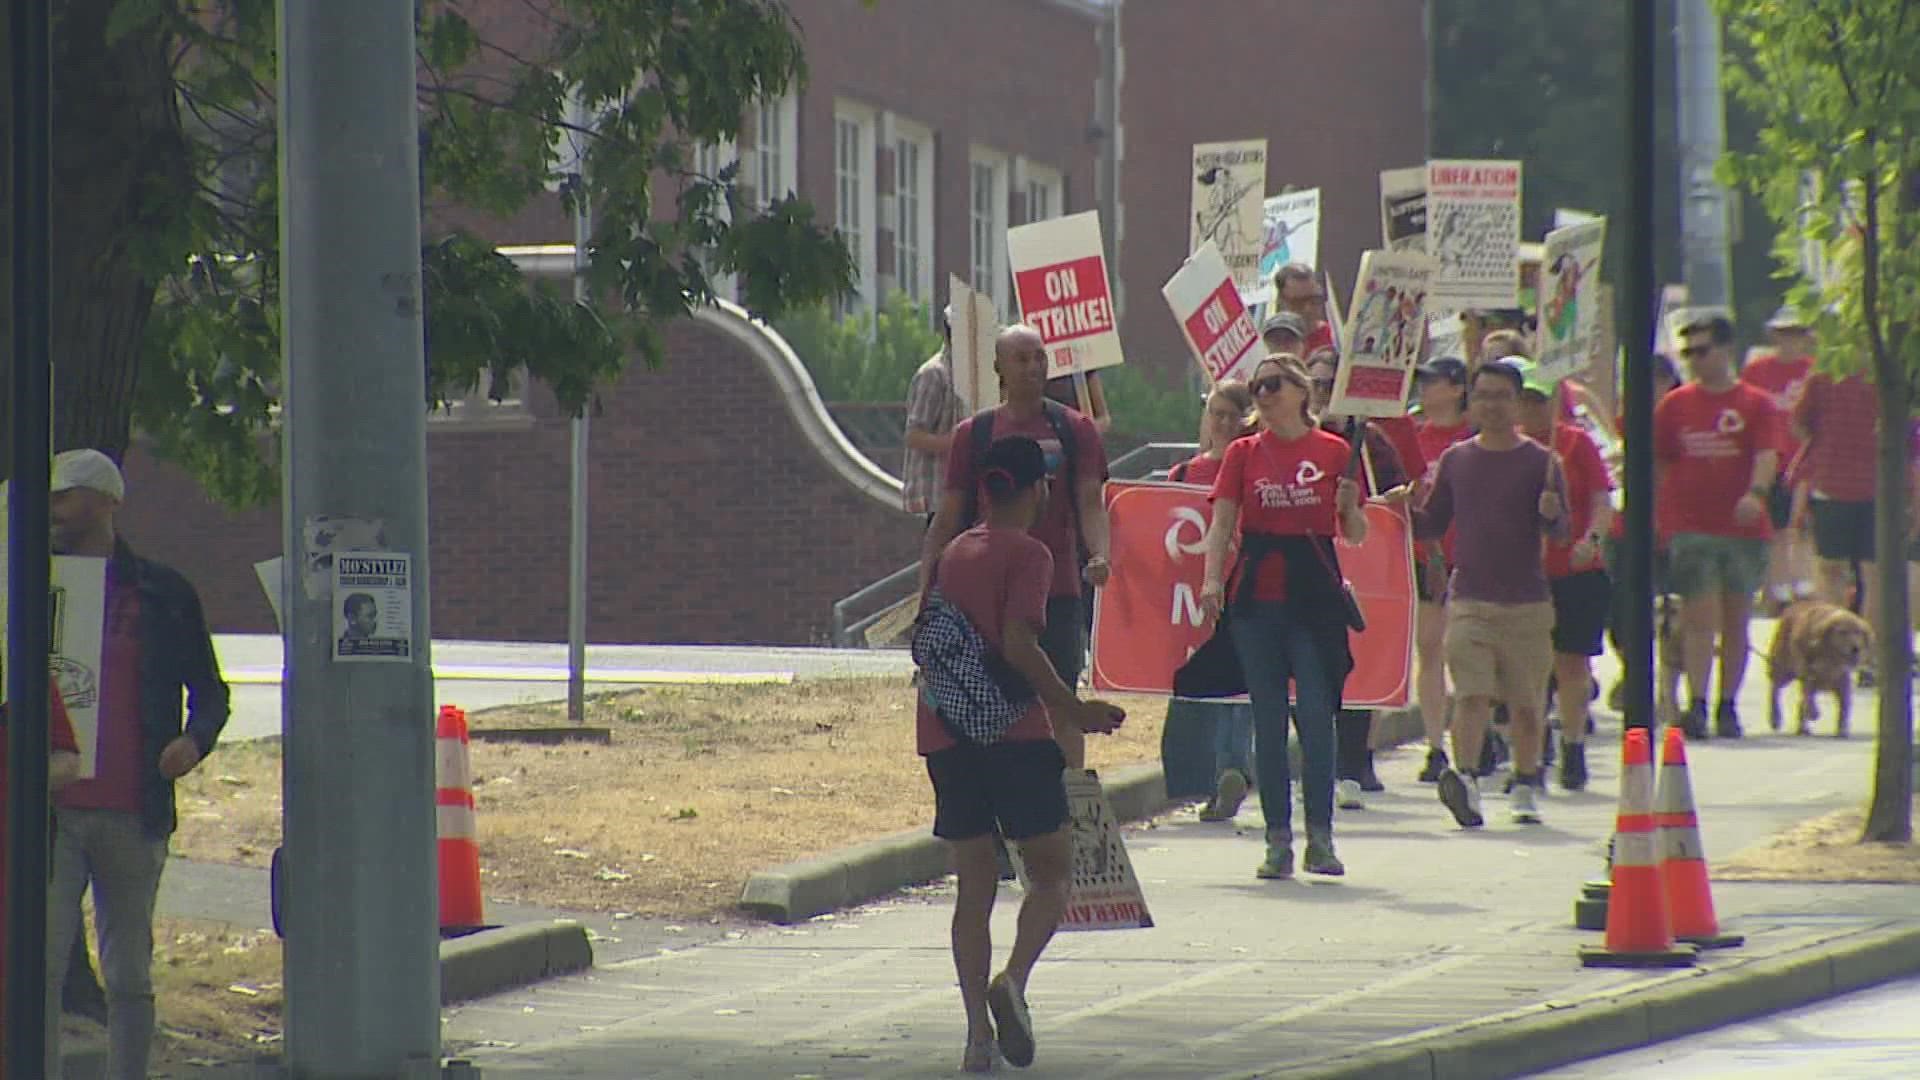 The teachers' union reached a tentative agreement with Seattle Public Schools on Sept. 12. Members voted to approve the new three-year contract Monday night.